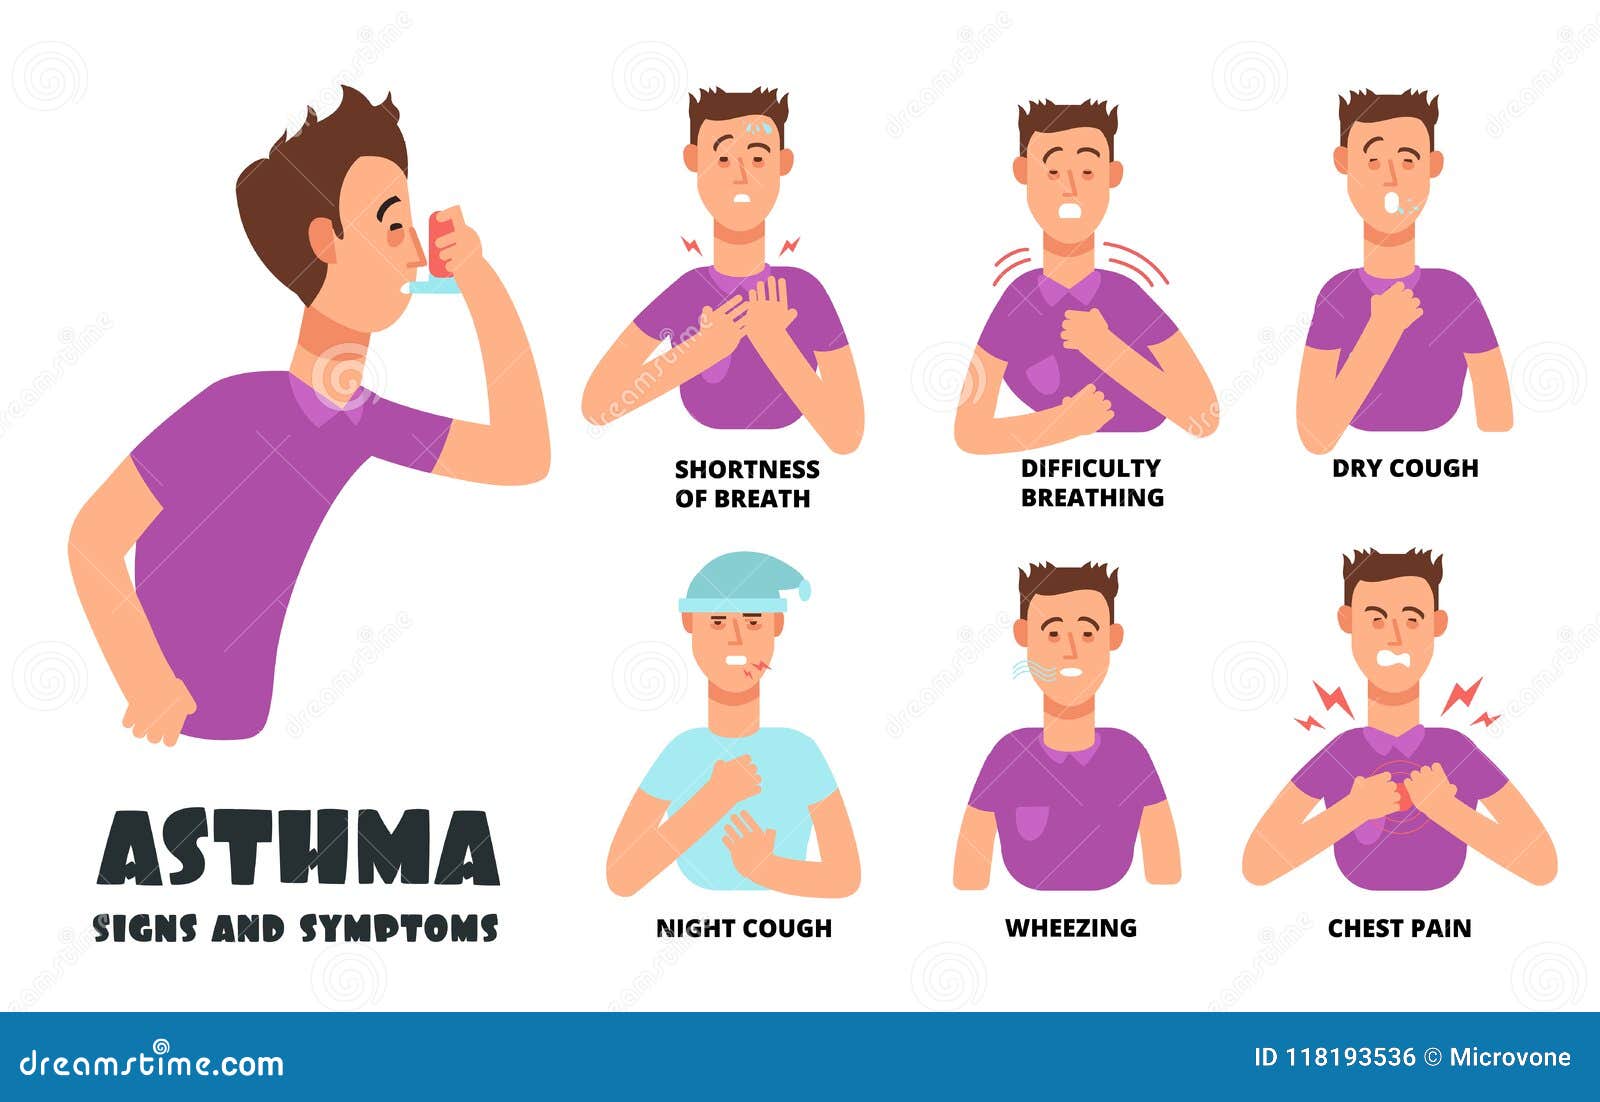 asthma symptoms with coughing cartoon person. asthmatic problems  infographic